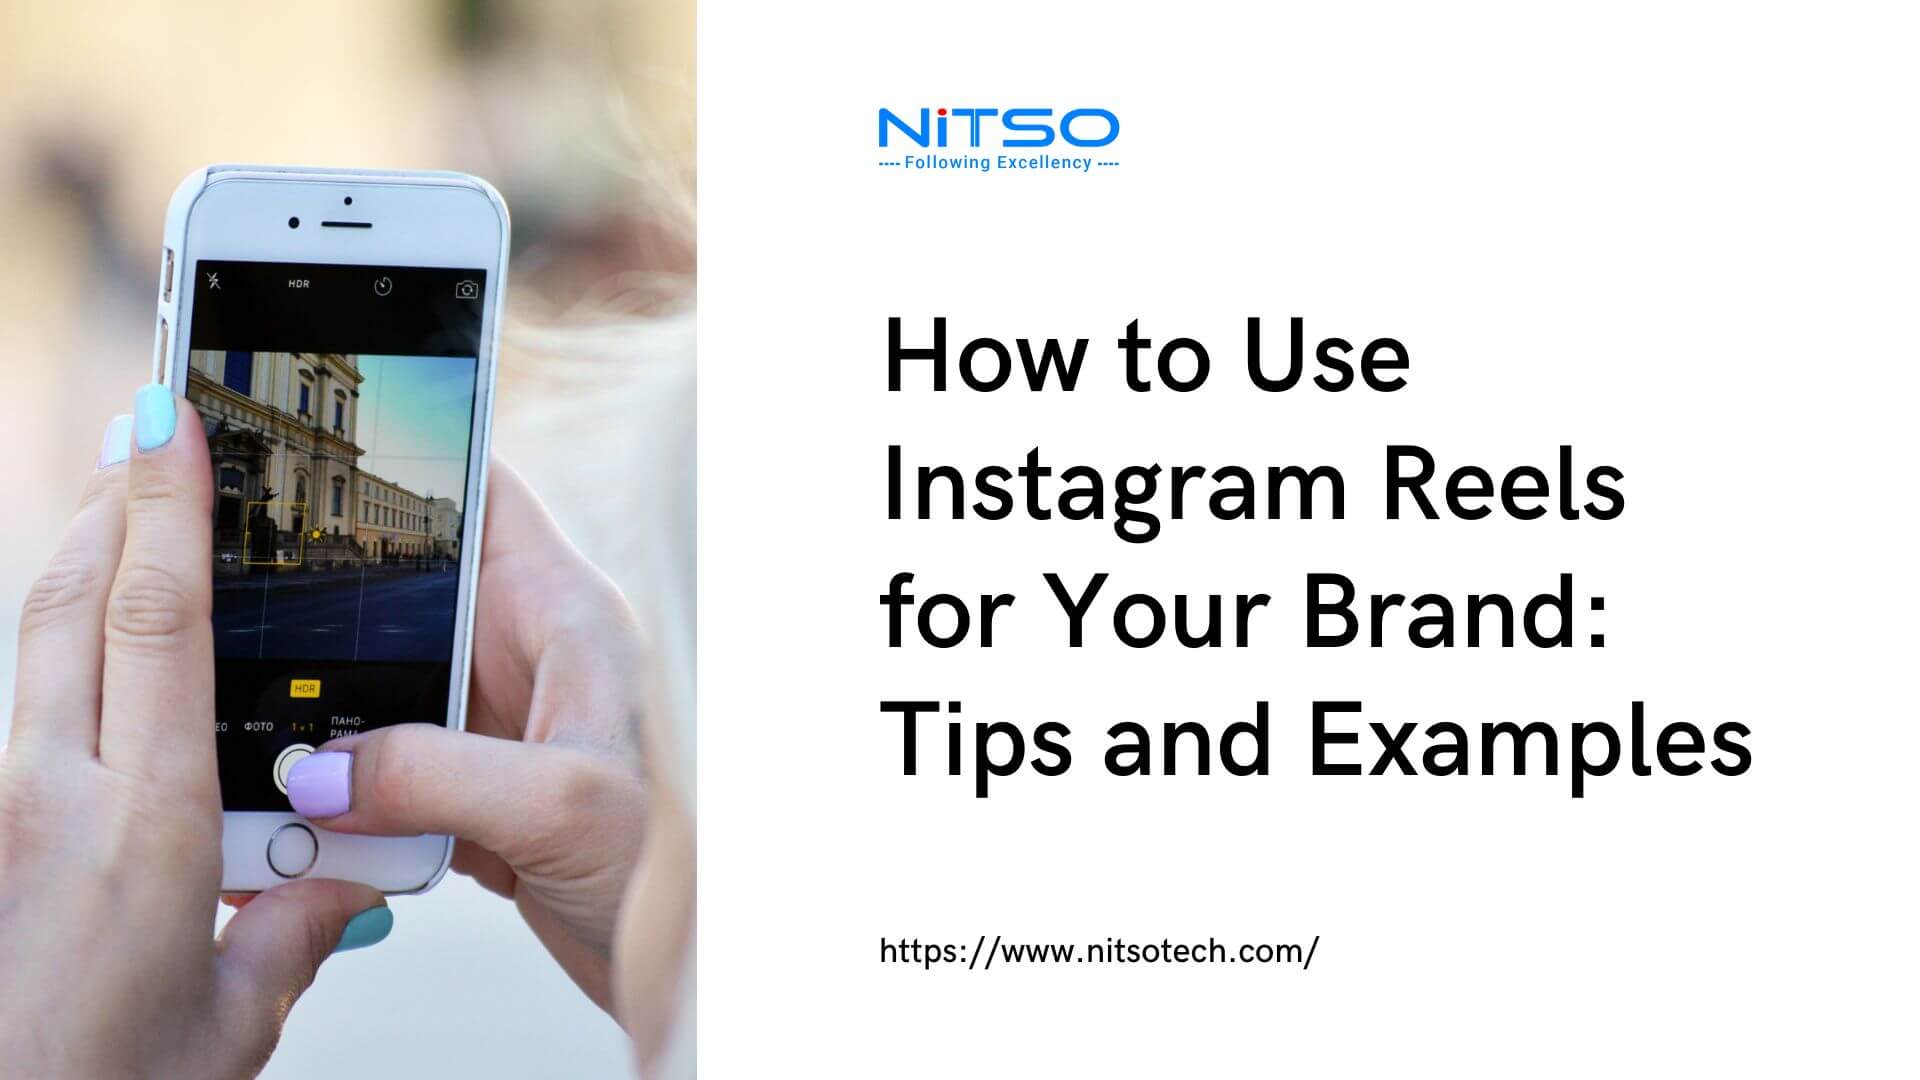 How to Use Instagram Reels for Your Brand: Tips and Examples